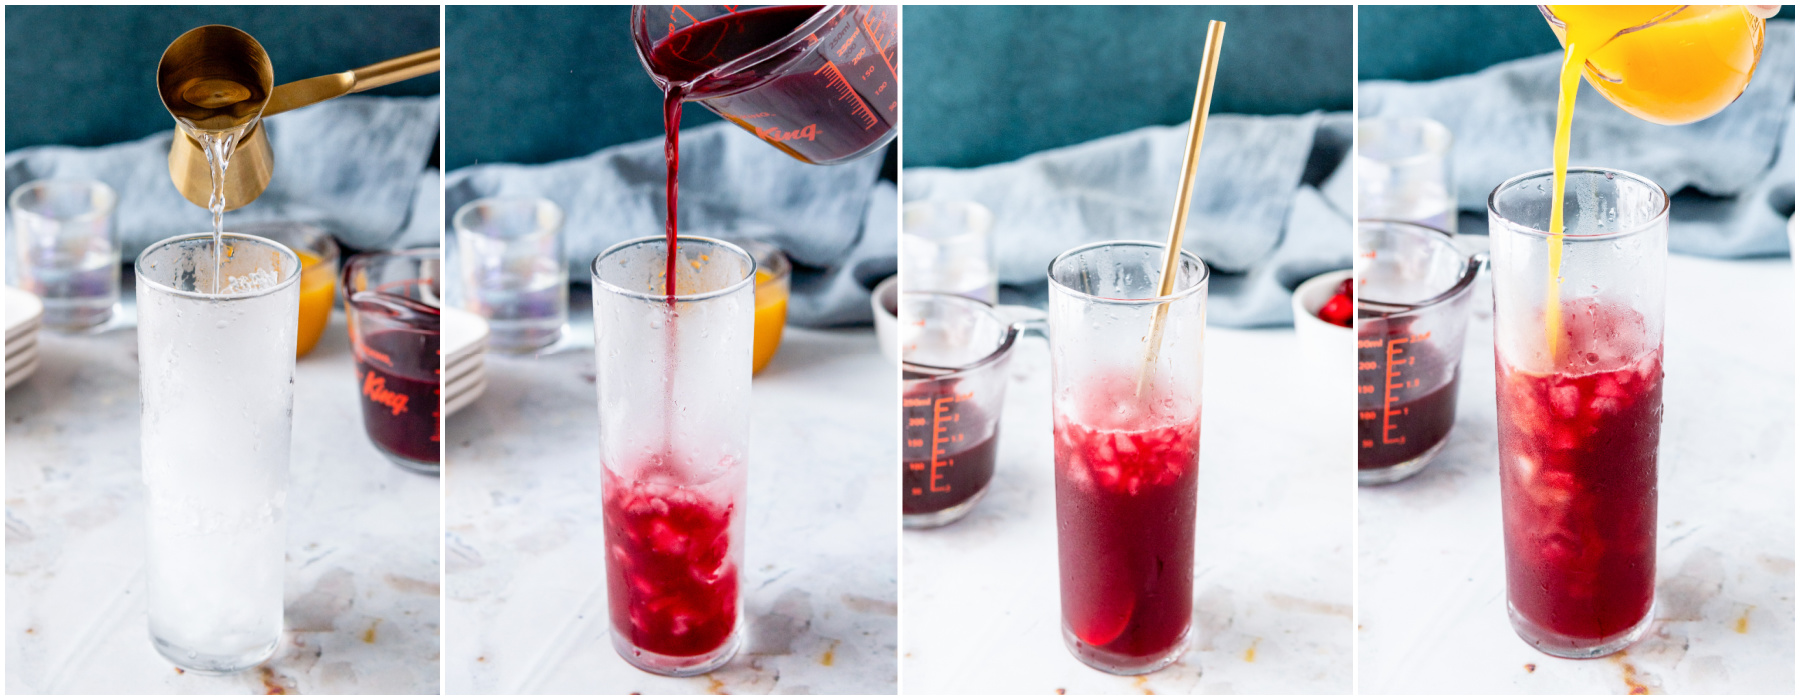 Process photos showing how to mix up a Mulled Cranberry Madras Cocktail.